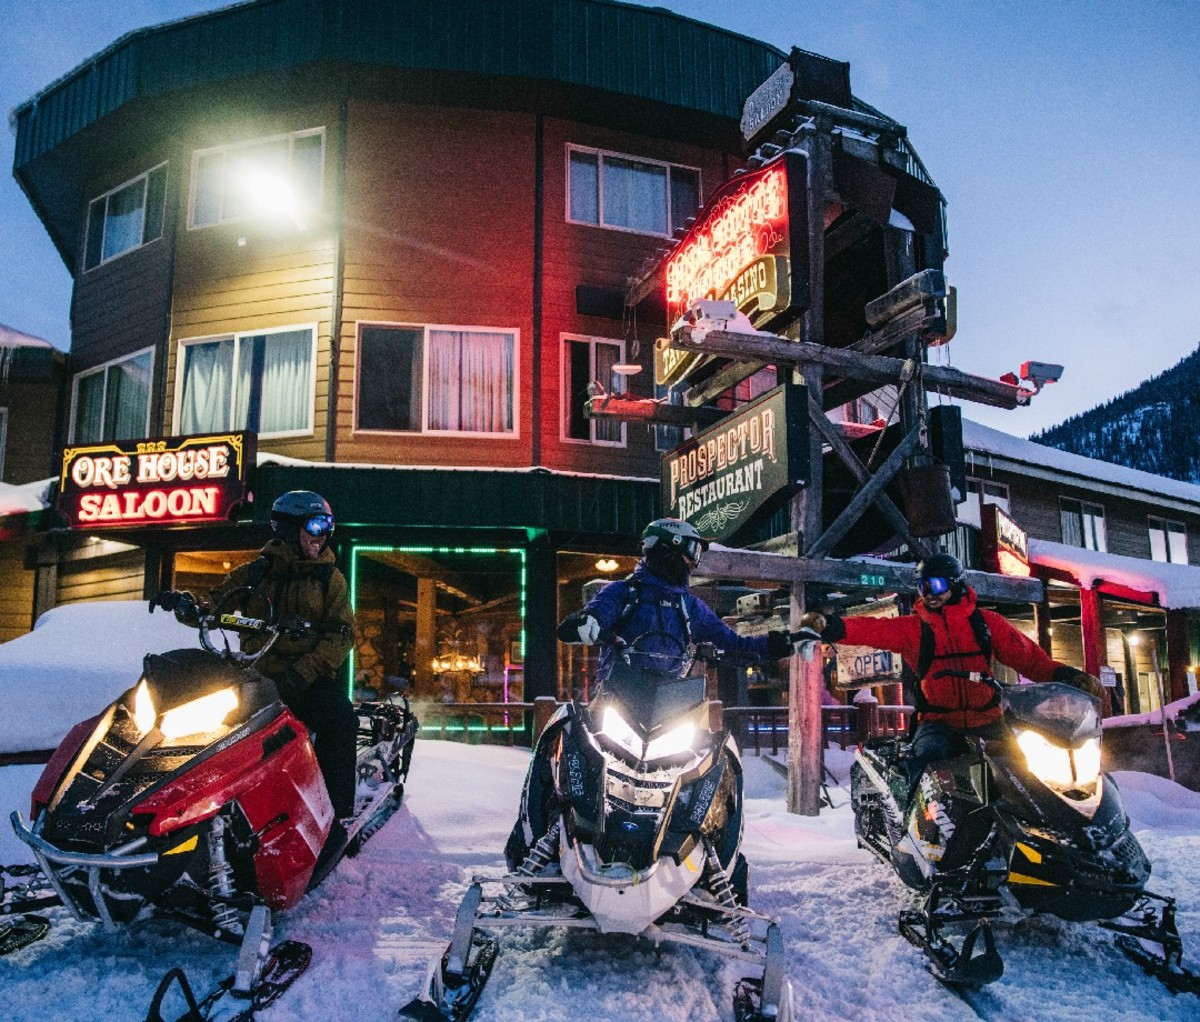 Three snowmobilers parked outside of a pub in Oregon.